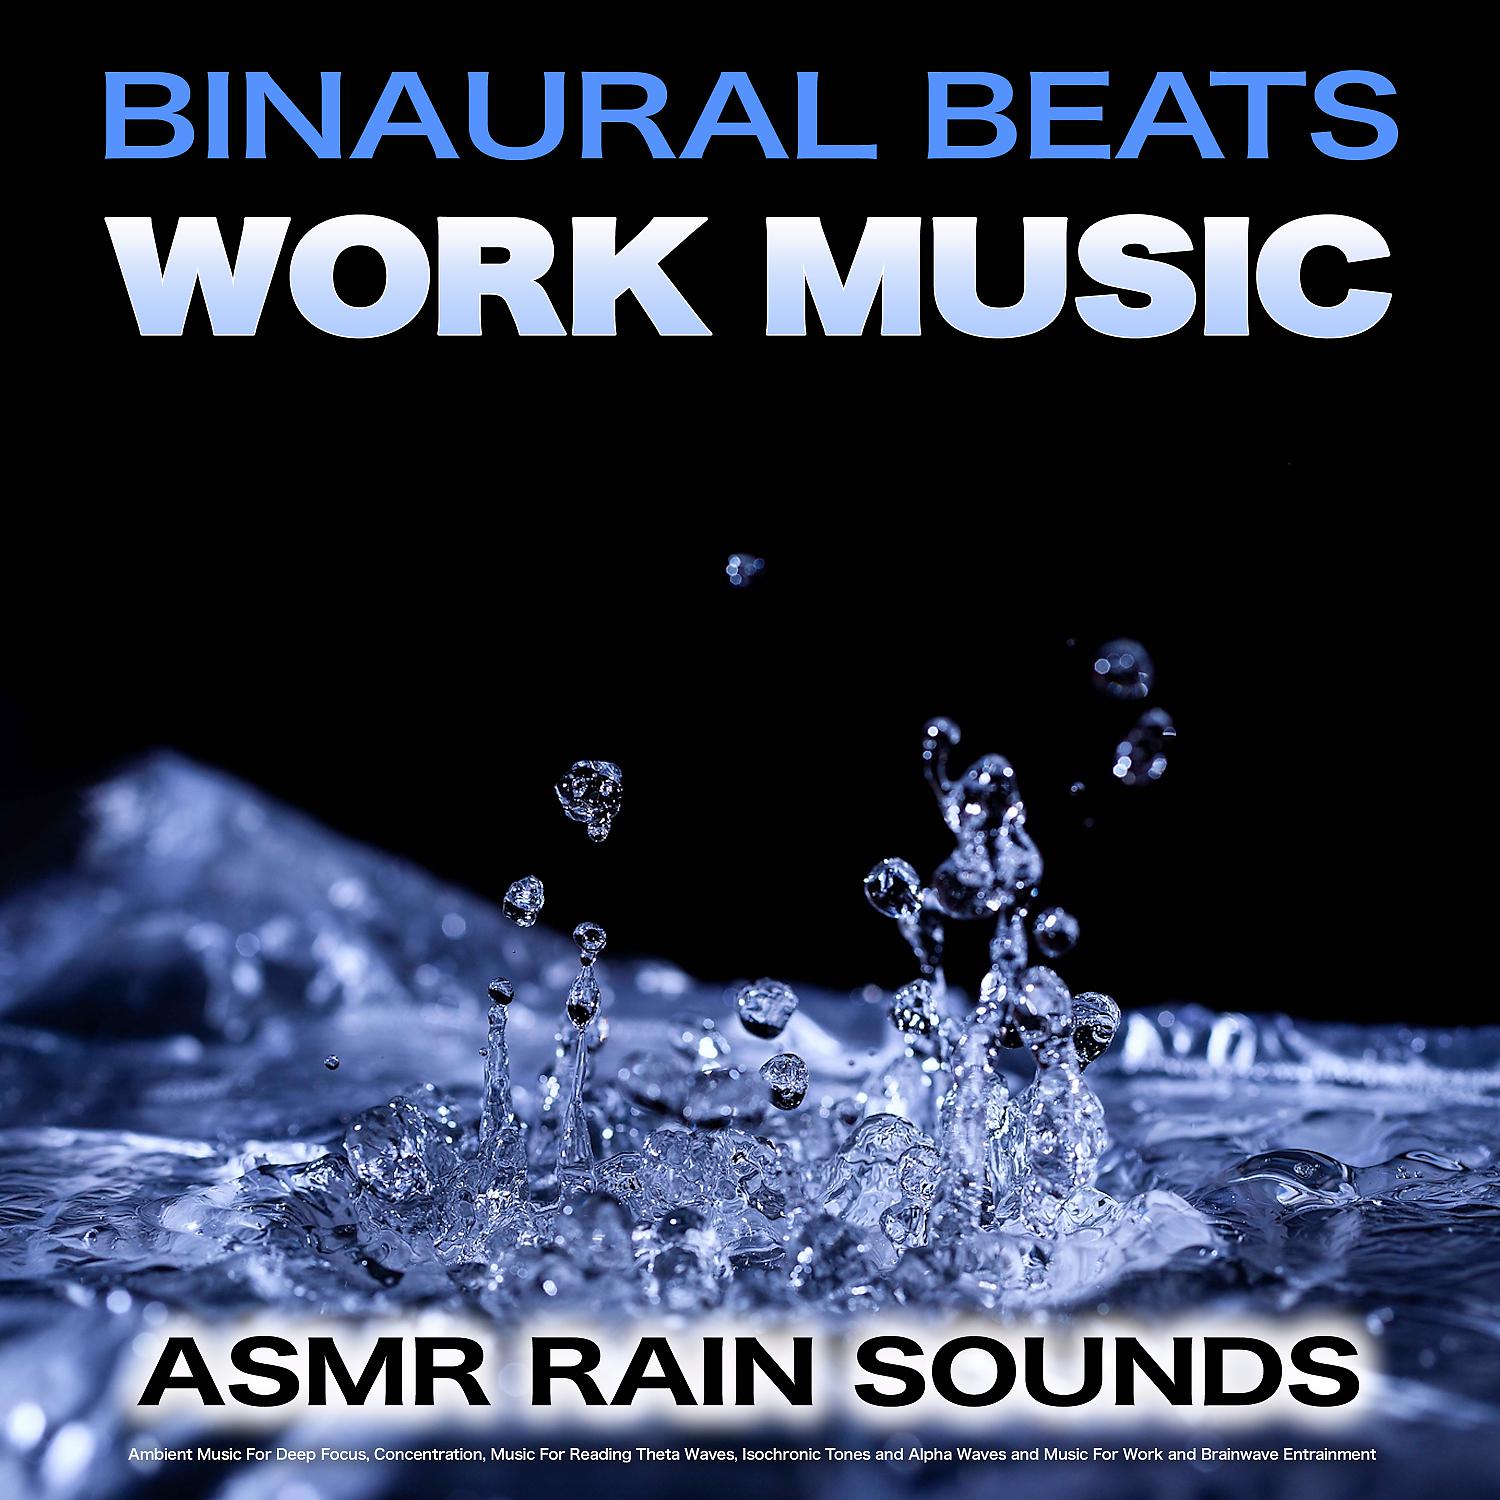 Постер альбома Binaural Beats Work Music: Asmr Rain Sounds, Ambient Music For Deep Focus, Concentration, Music For Reading Theta Waves, Isochronic Tones and Alpha Waves and Music For Work and Brainwave Entrainment